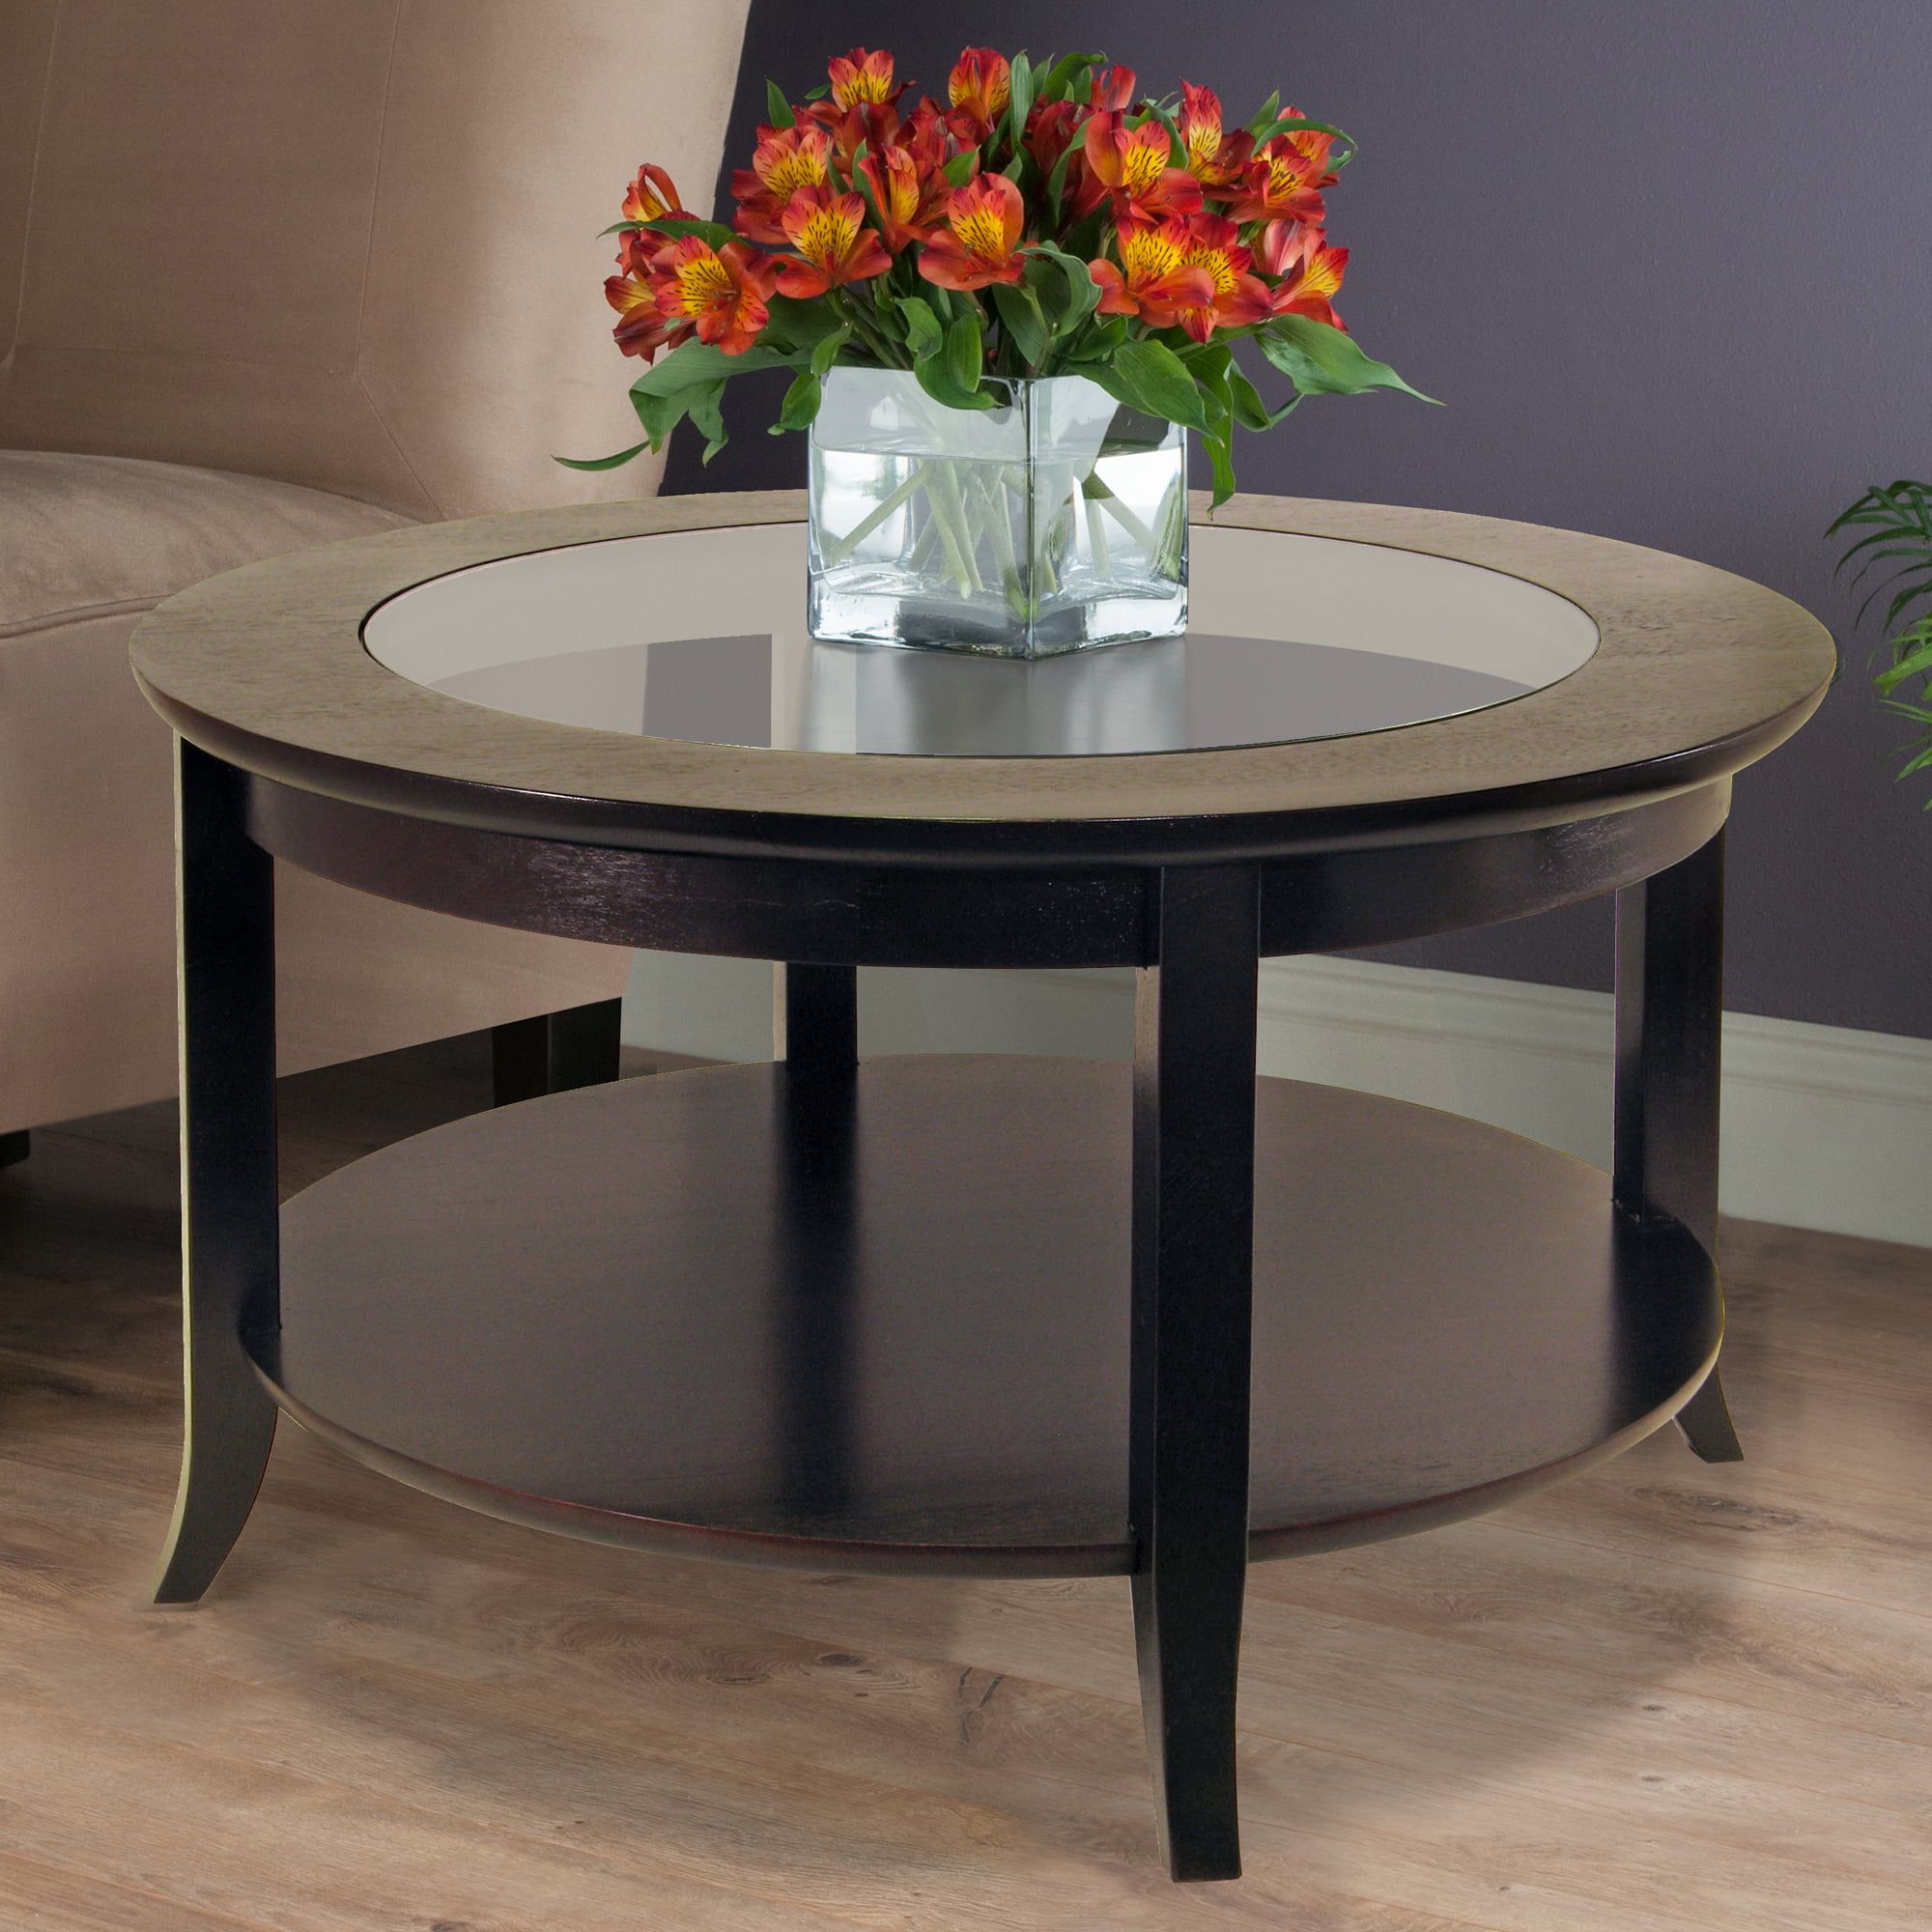 Winsome Wood Genoa Round Coffee Table With Glass Top, Espresso Finish For Coffee Tables With Round Wooden Tops (Gallery 11 of 20)